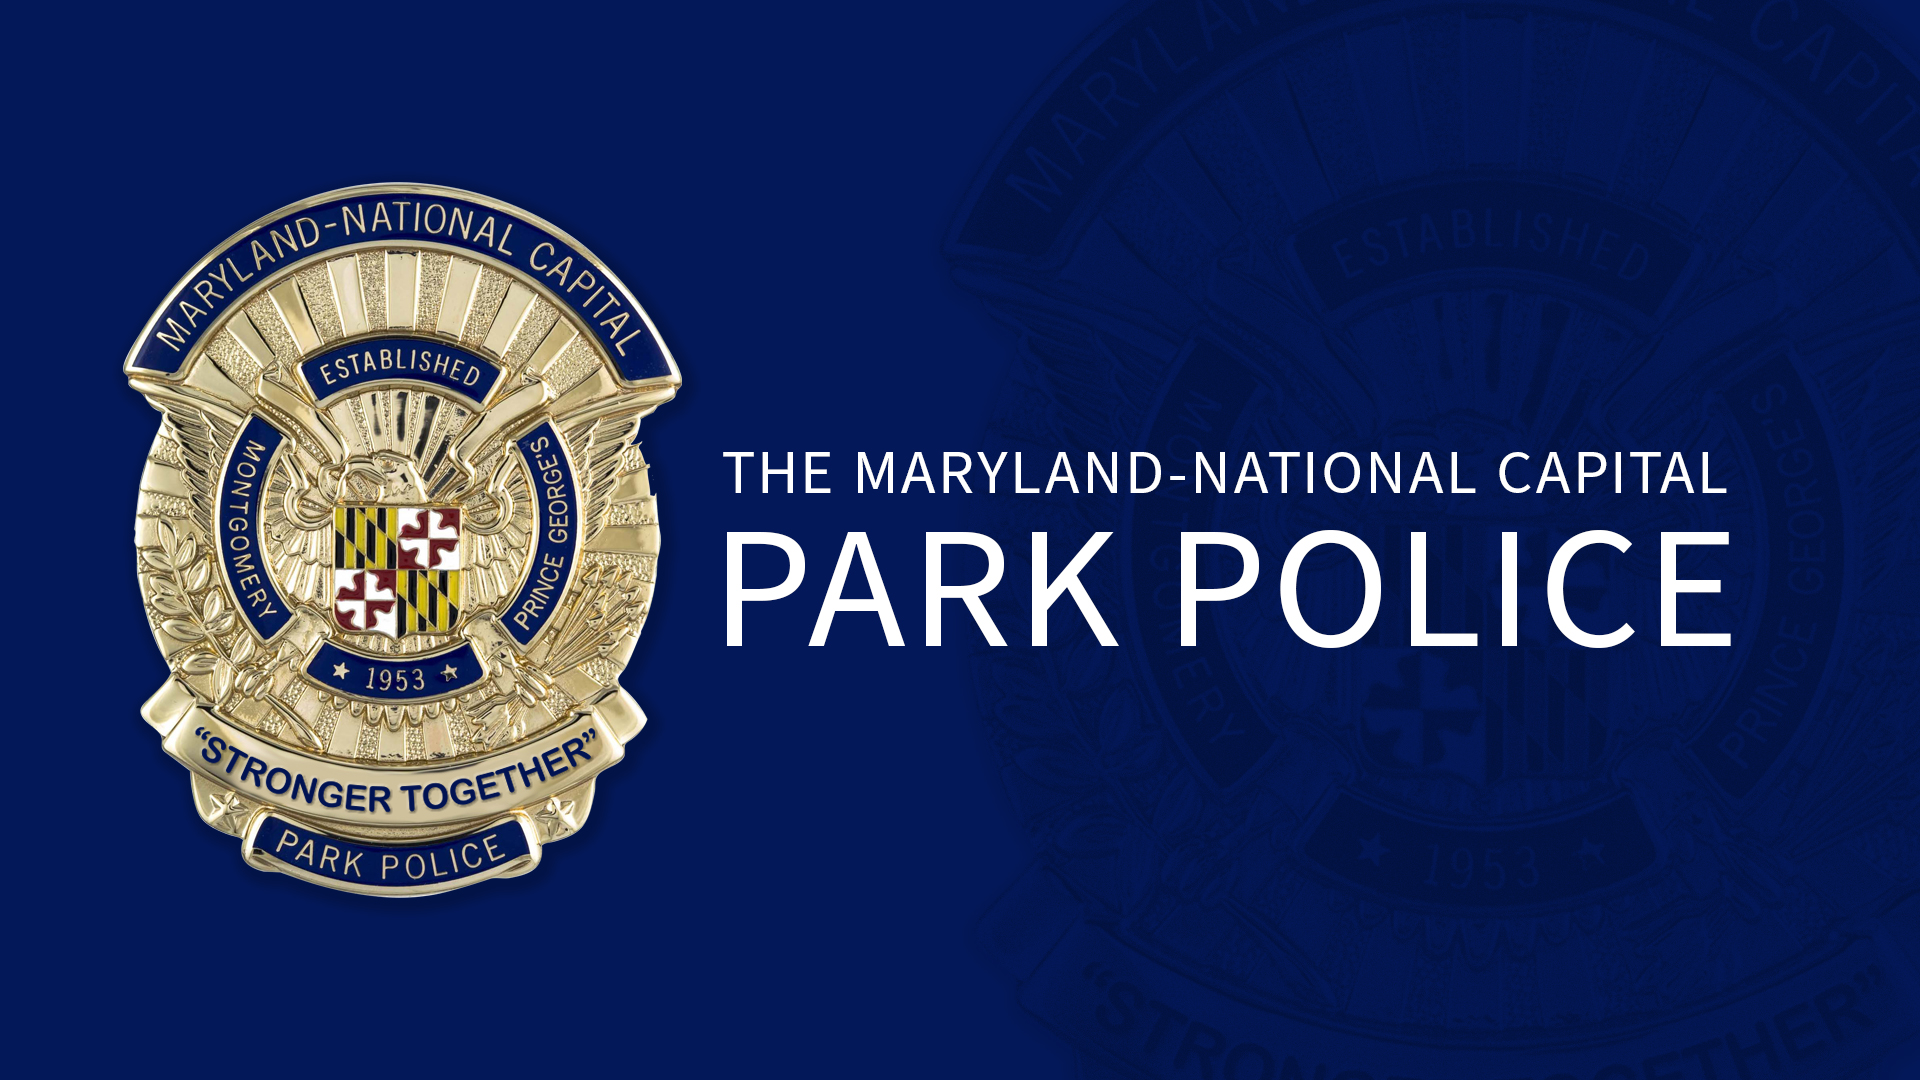 The Maryland National Capital Park Police and Badge